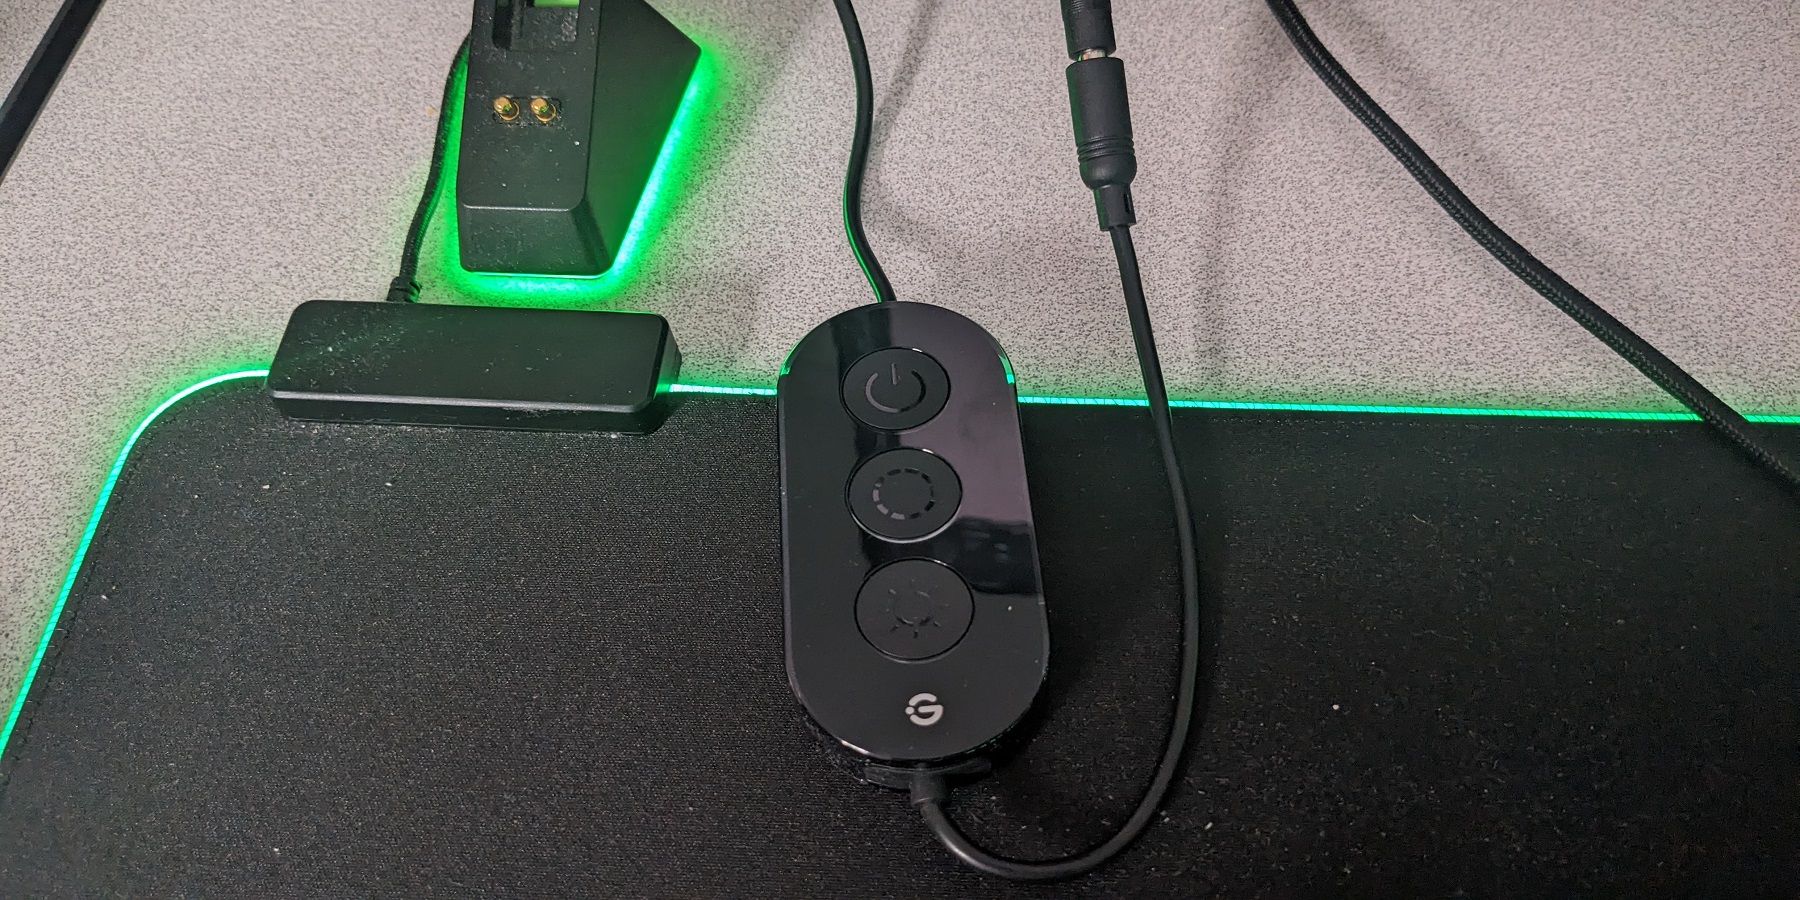 Govee Gaming Light Strip G1 Review